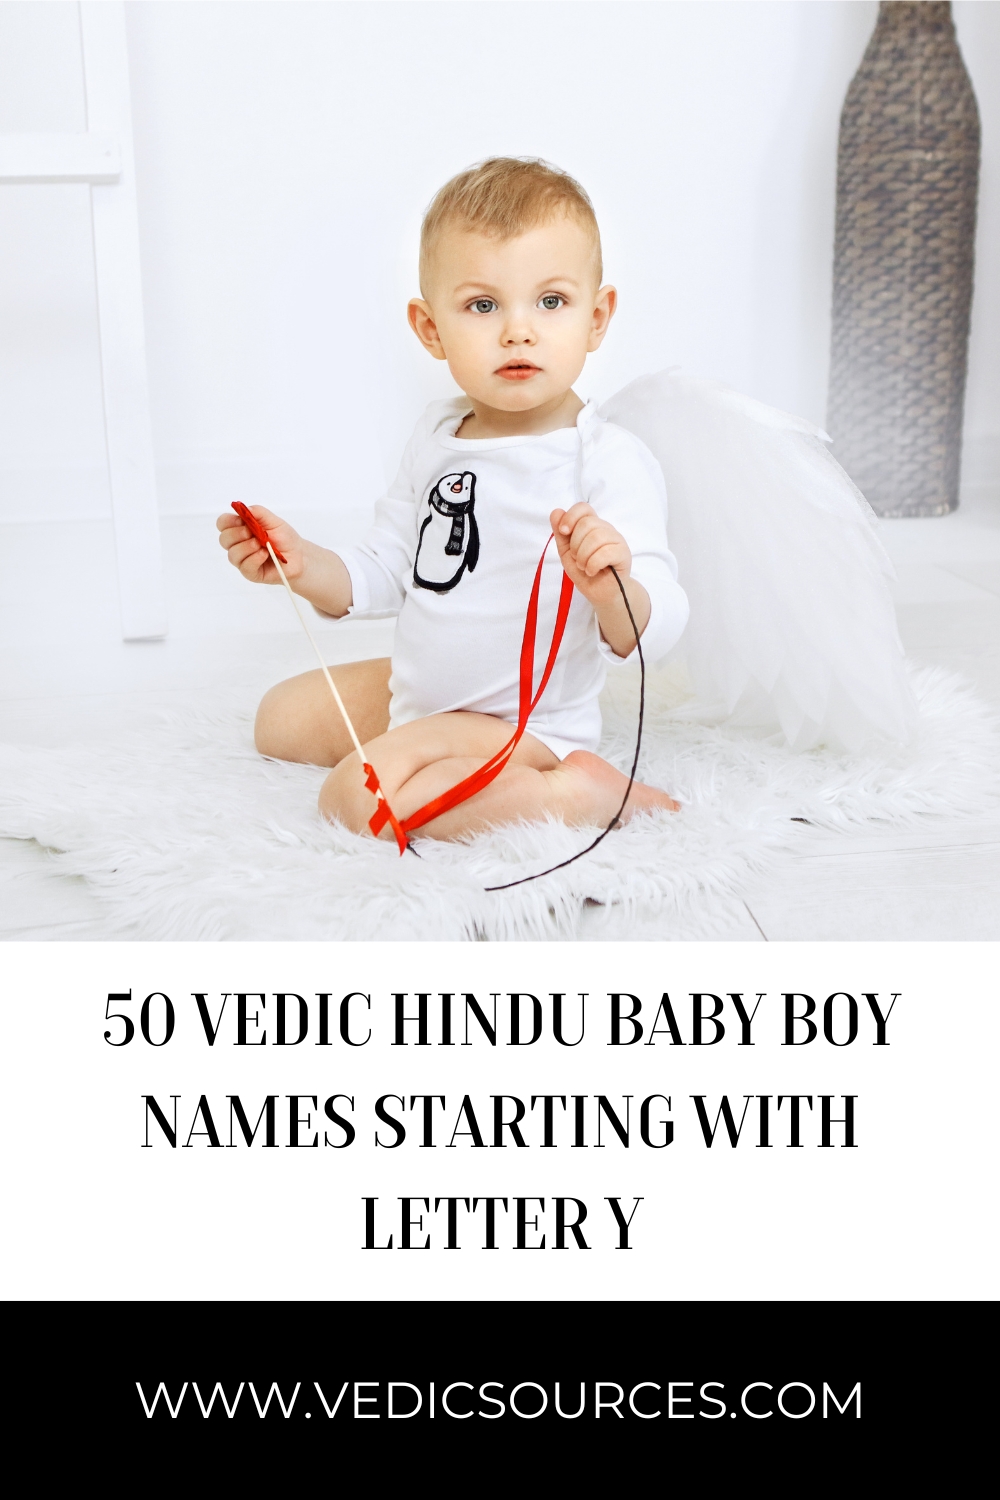 50 Vedic Hindu Baby Boy Names Starting with Letter Y